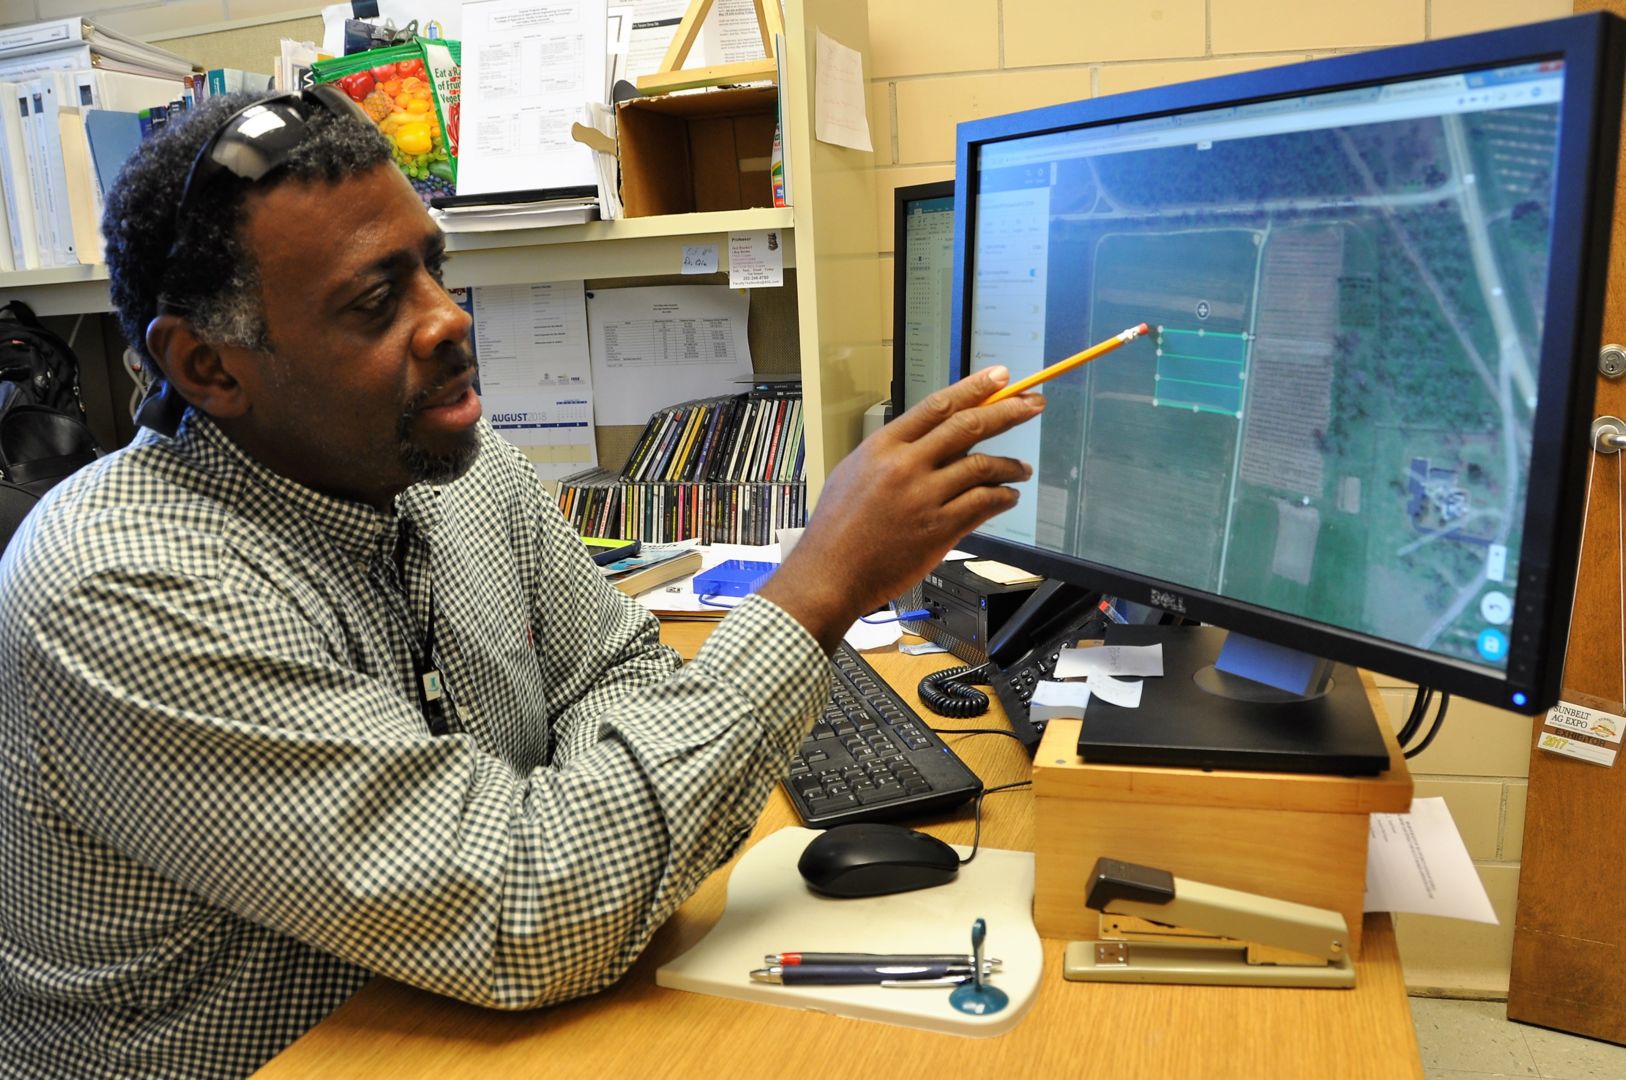 Dr. Archie Williams uses a computer program called DroneDeploy to map a plot of sorghum located on campus.